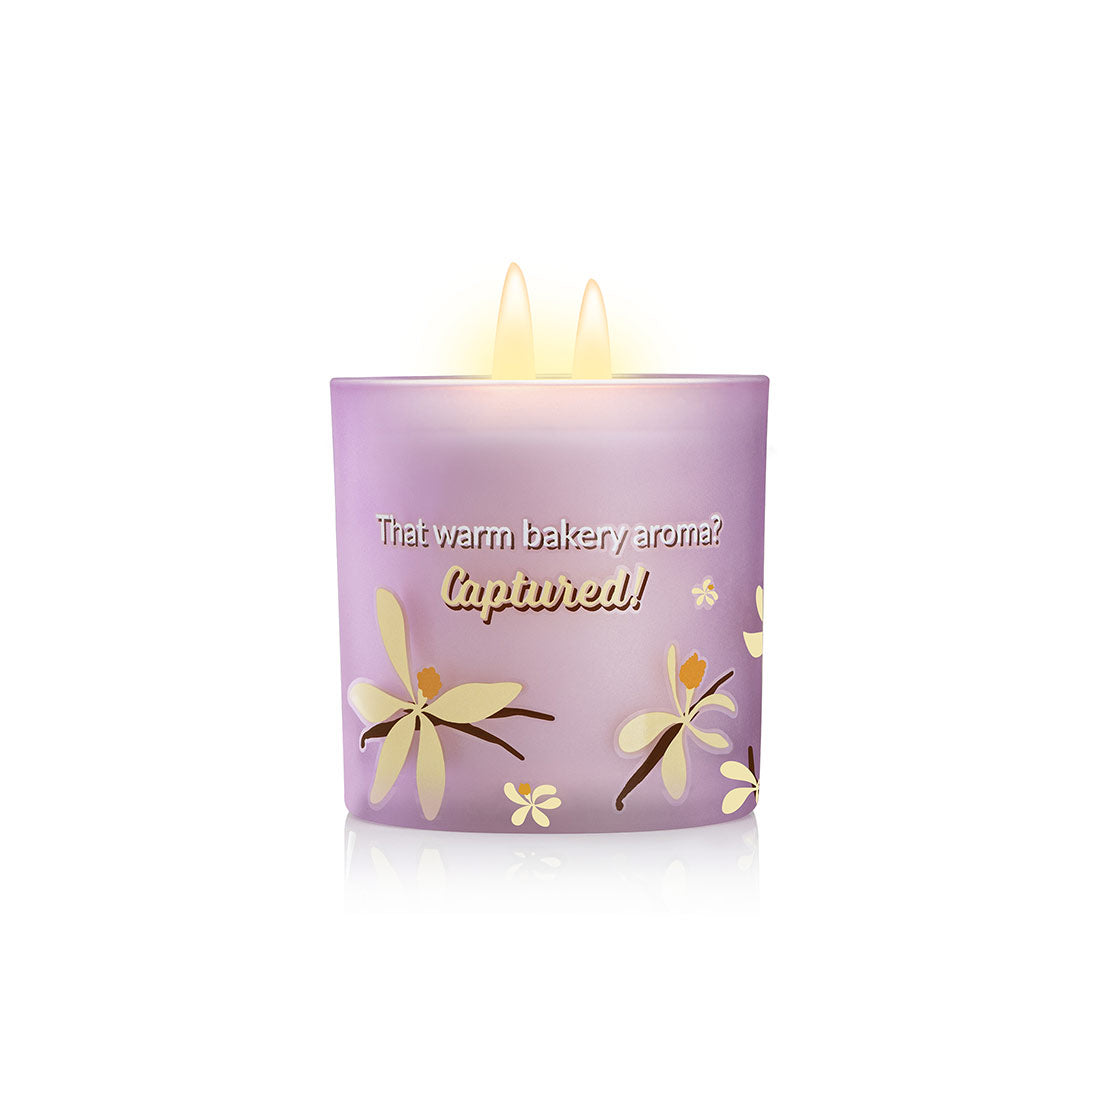 Plum BodyLovin’ Vanilla Vibes Scented Candle | Long-lasting Fragrance | Evenly Melting Wax